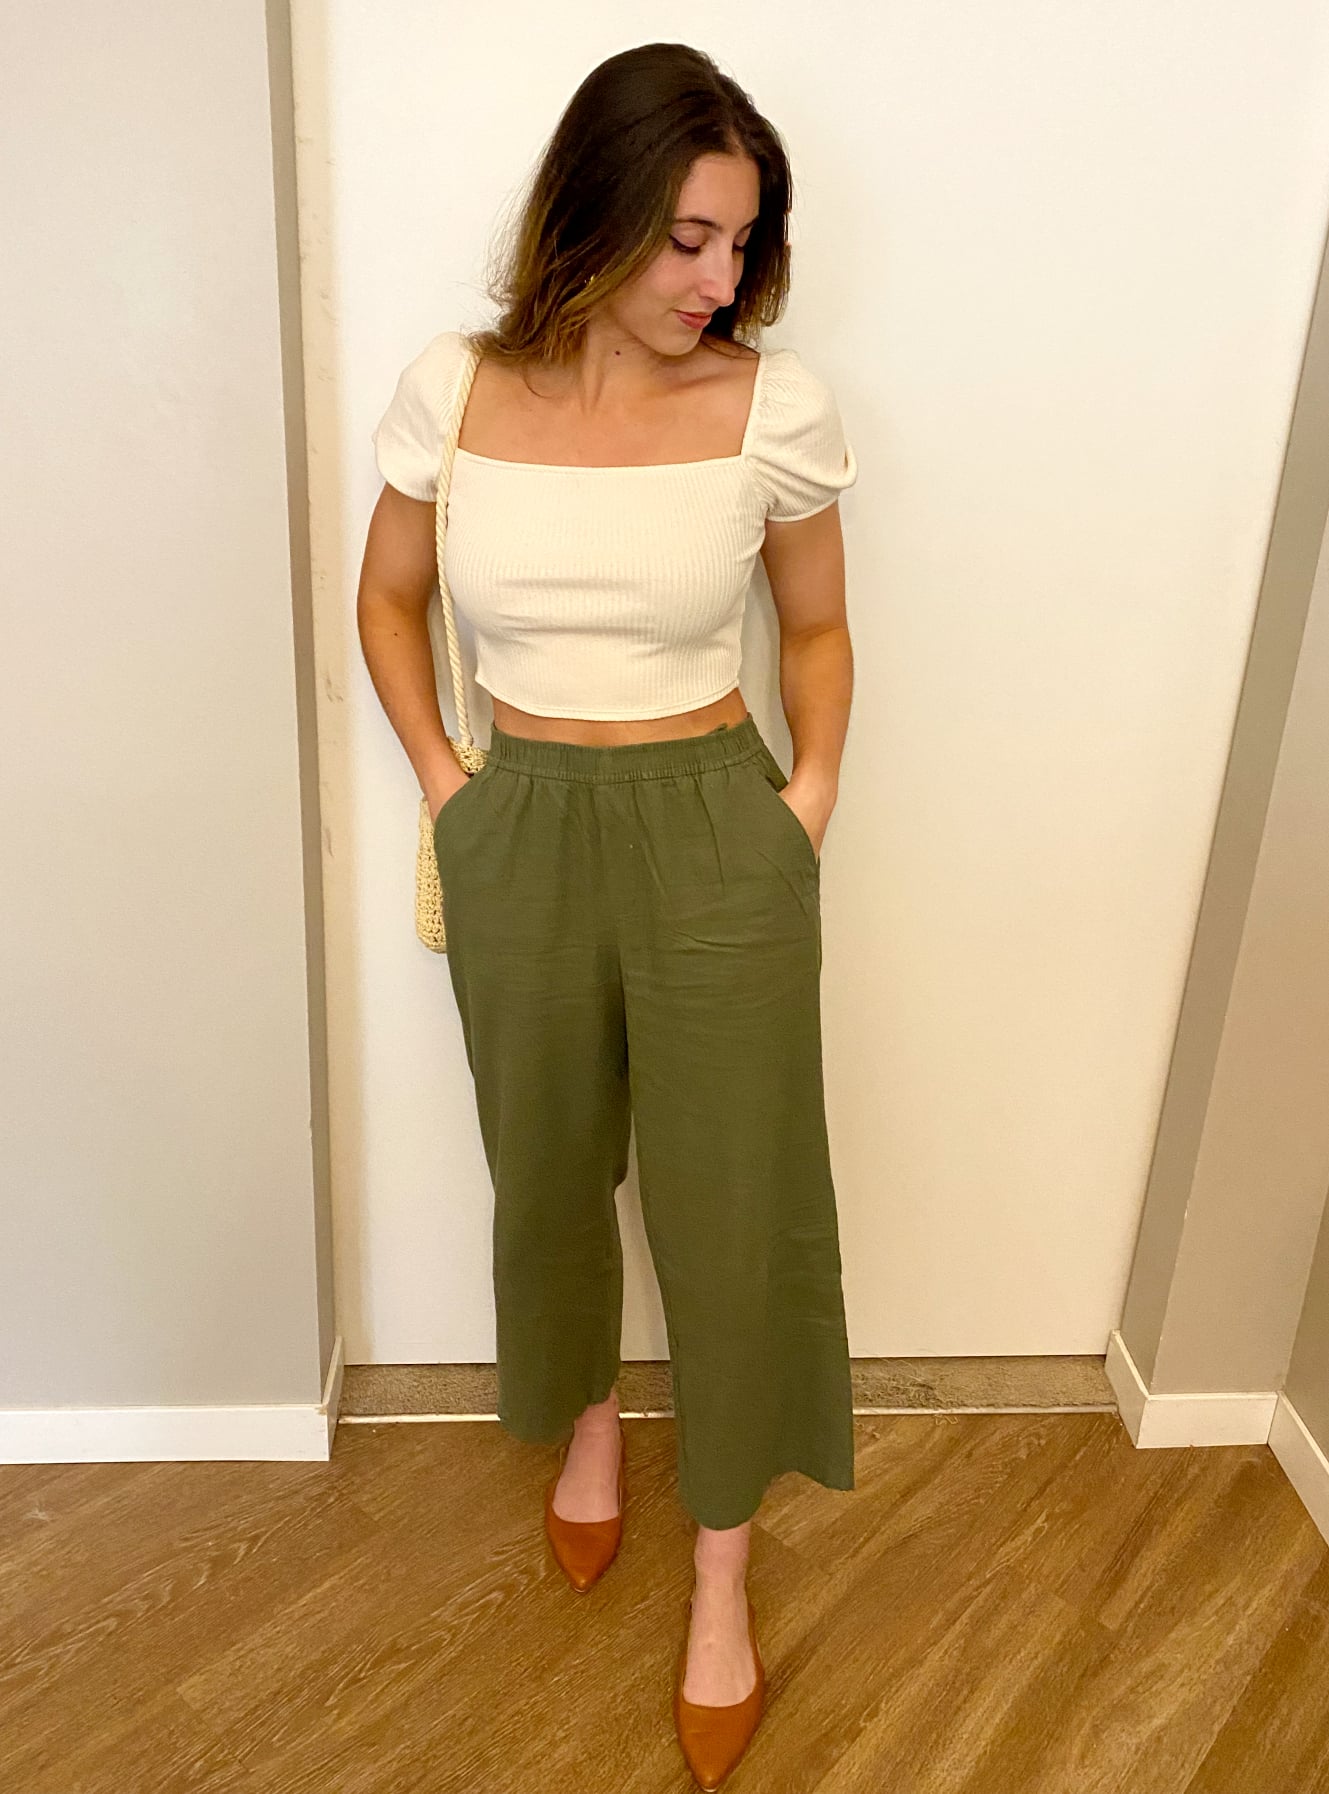 REMIX: Four Summer Outfits With Linen Pants - Mustardy Tan